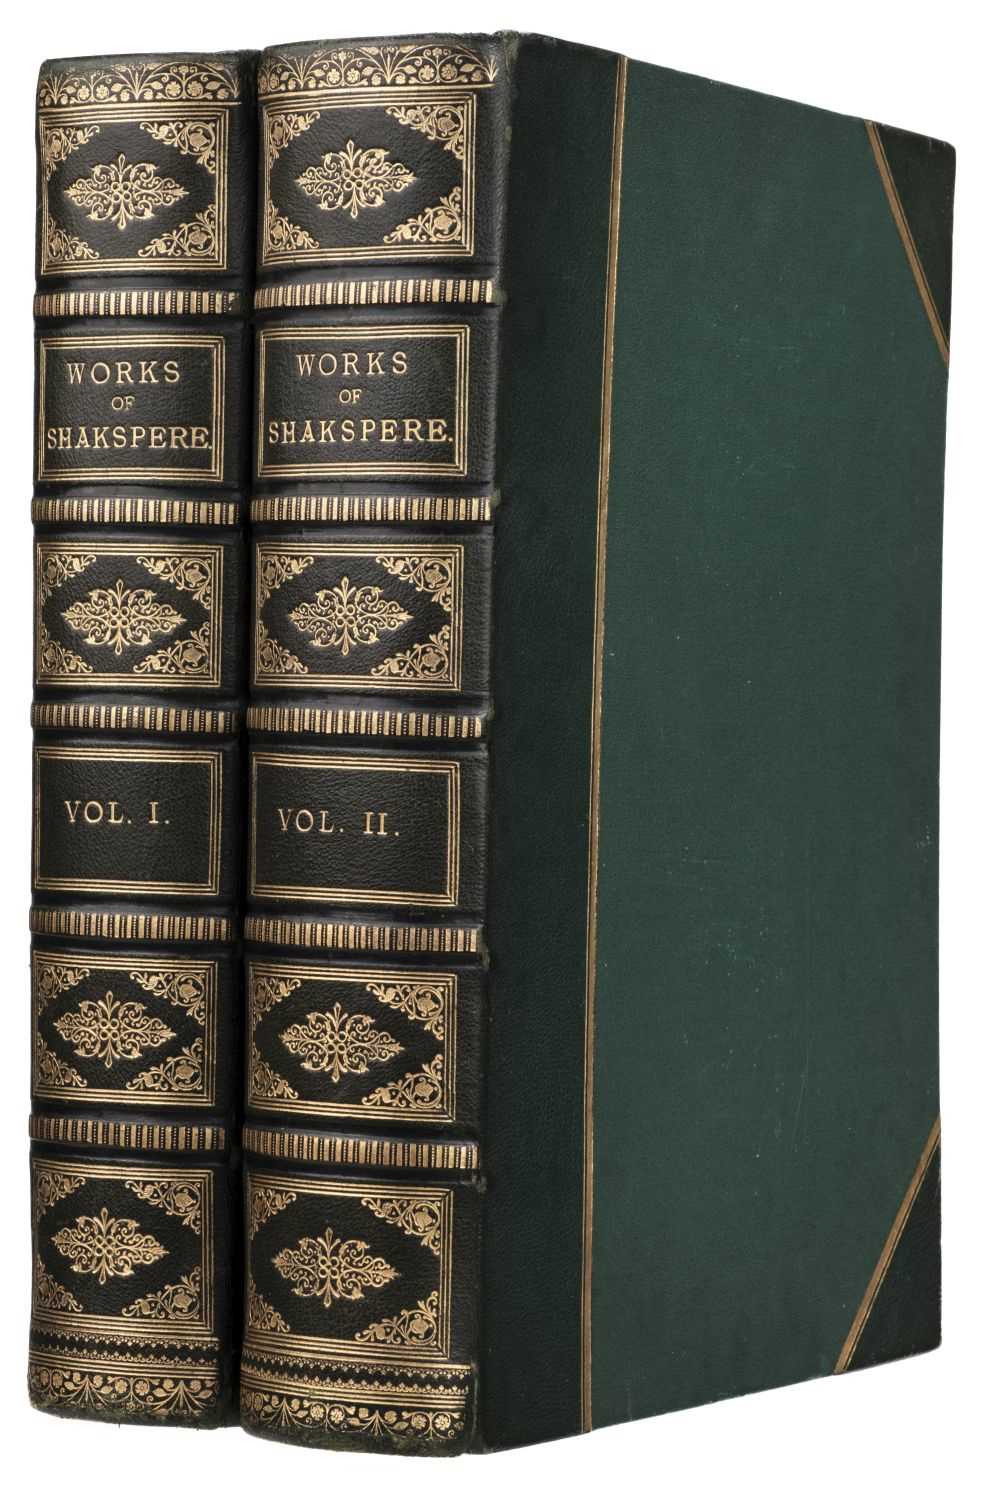 Lot 352 - The Works of Shakespere, Imperial Edition, edited by Charles Knight, 2 volumes, London, 1876